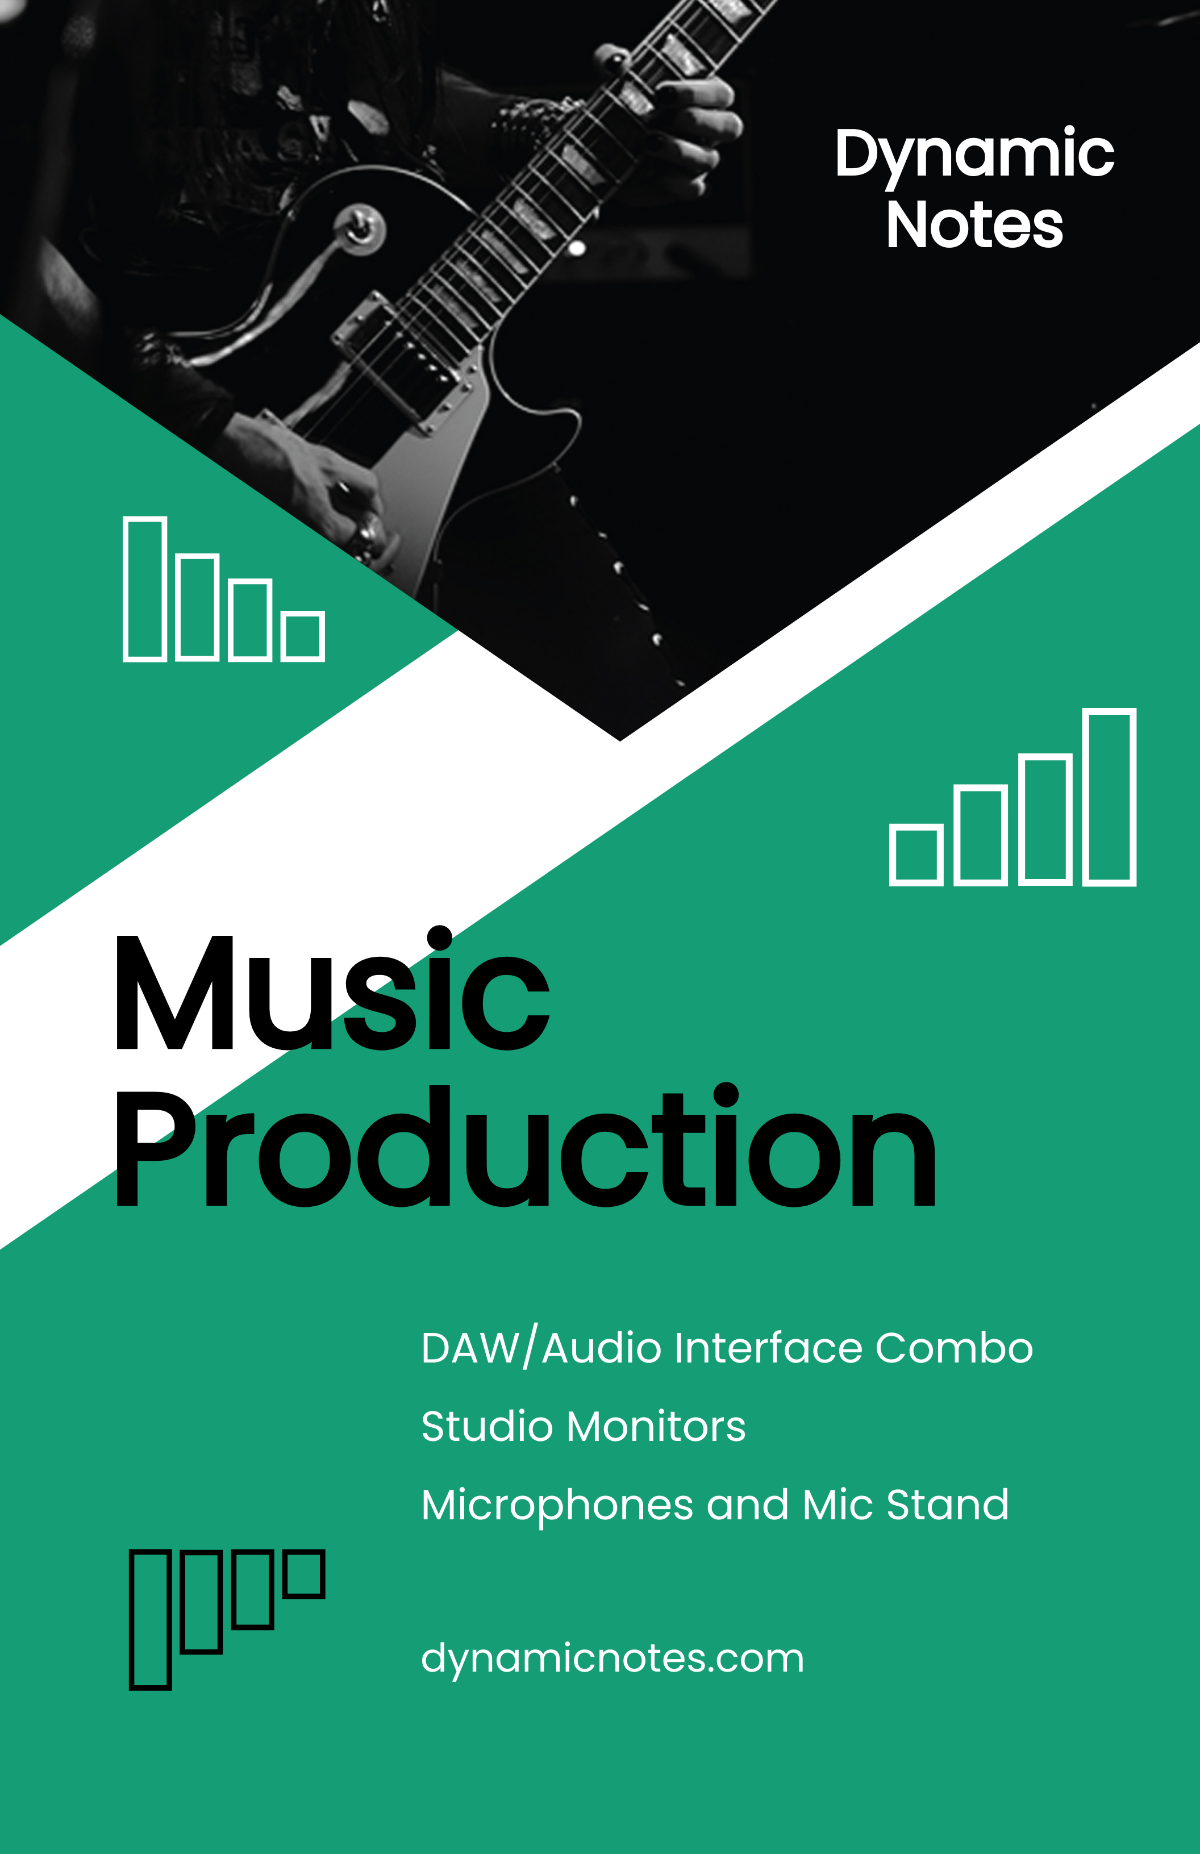 Music Production Poster Template